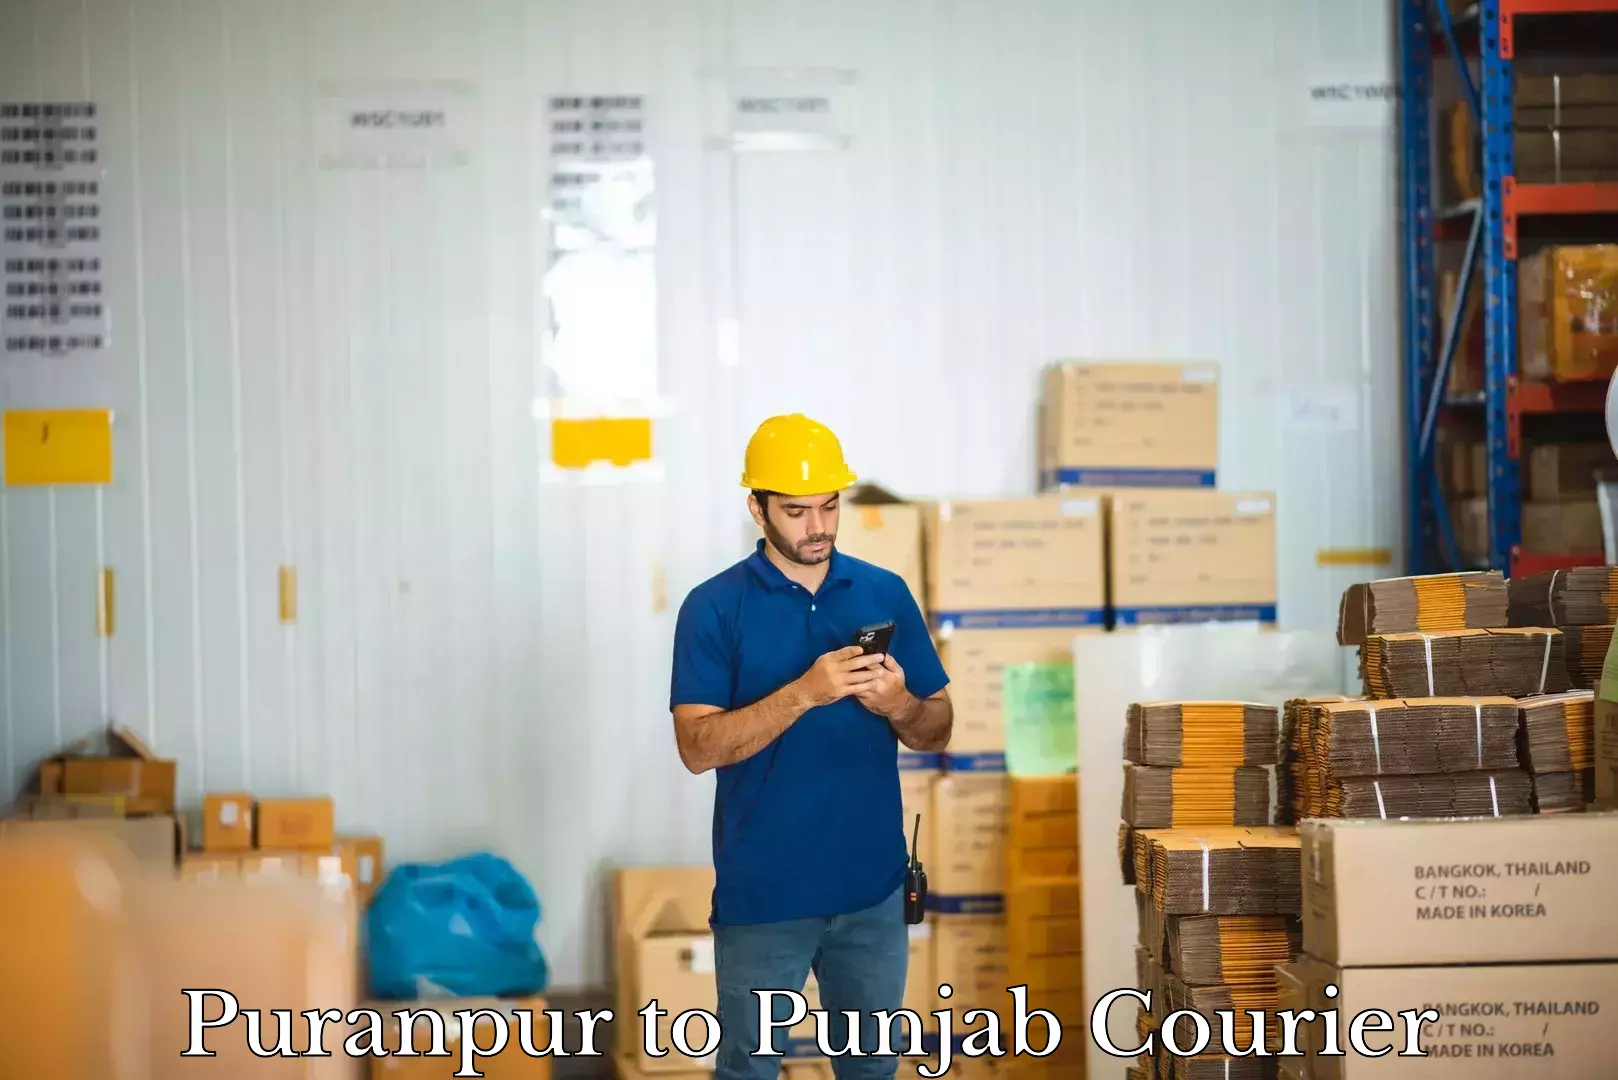 Luggage shipment specialists Puranpur to Mohali